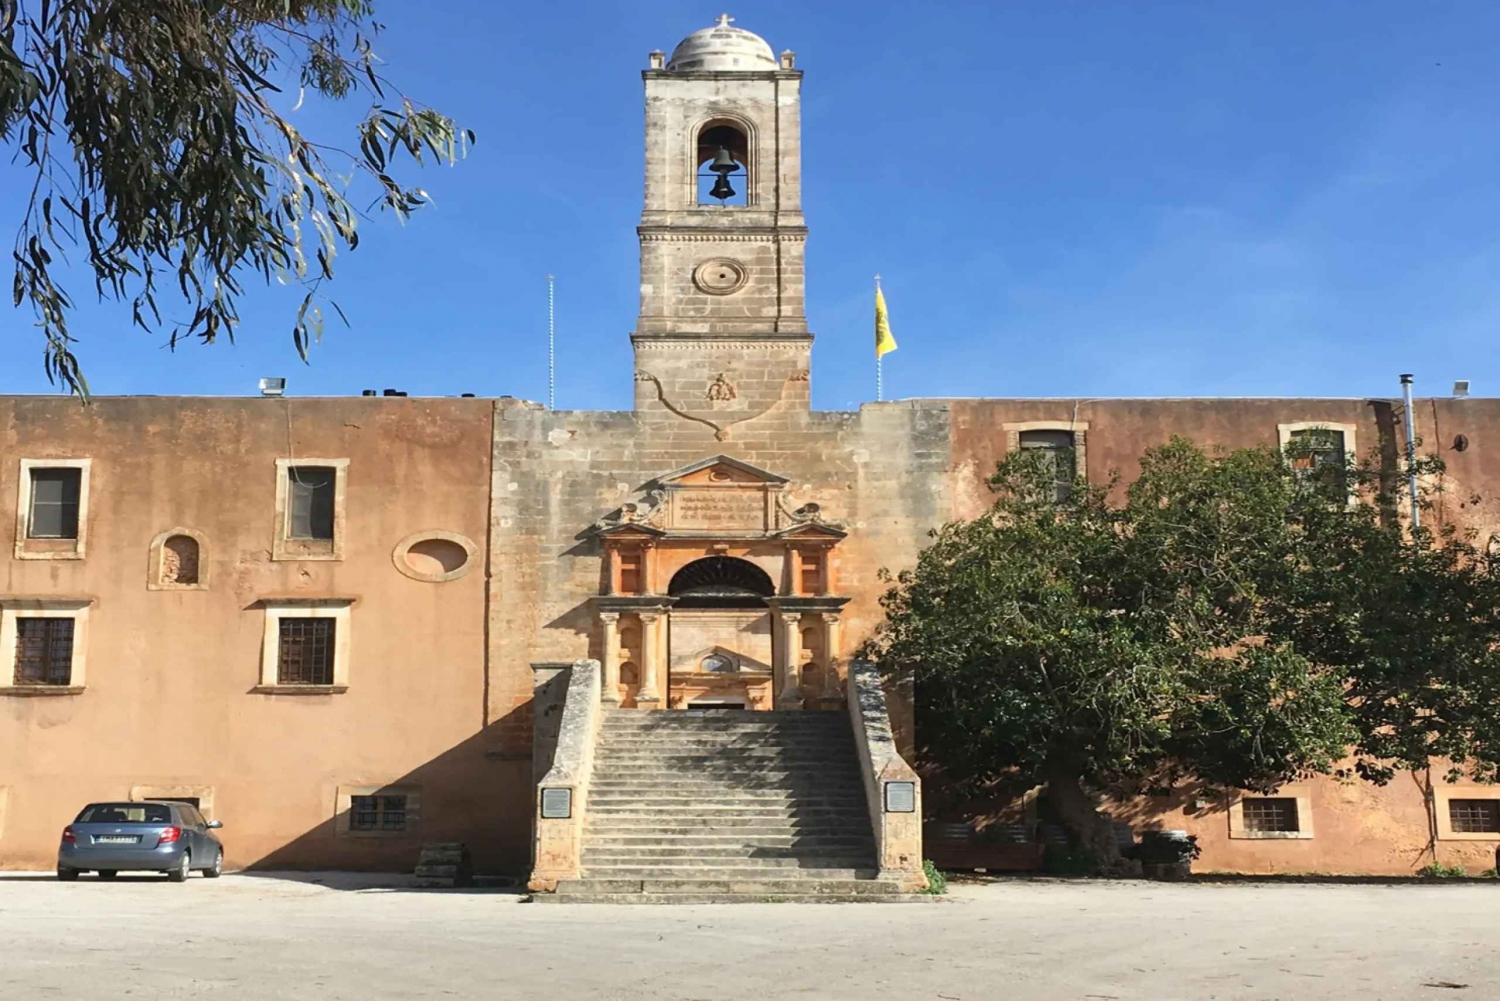 Chania Monasteries: A private tour to Greek Orthodoxy